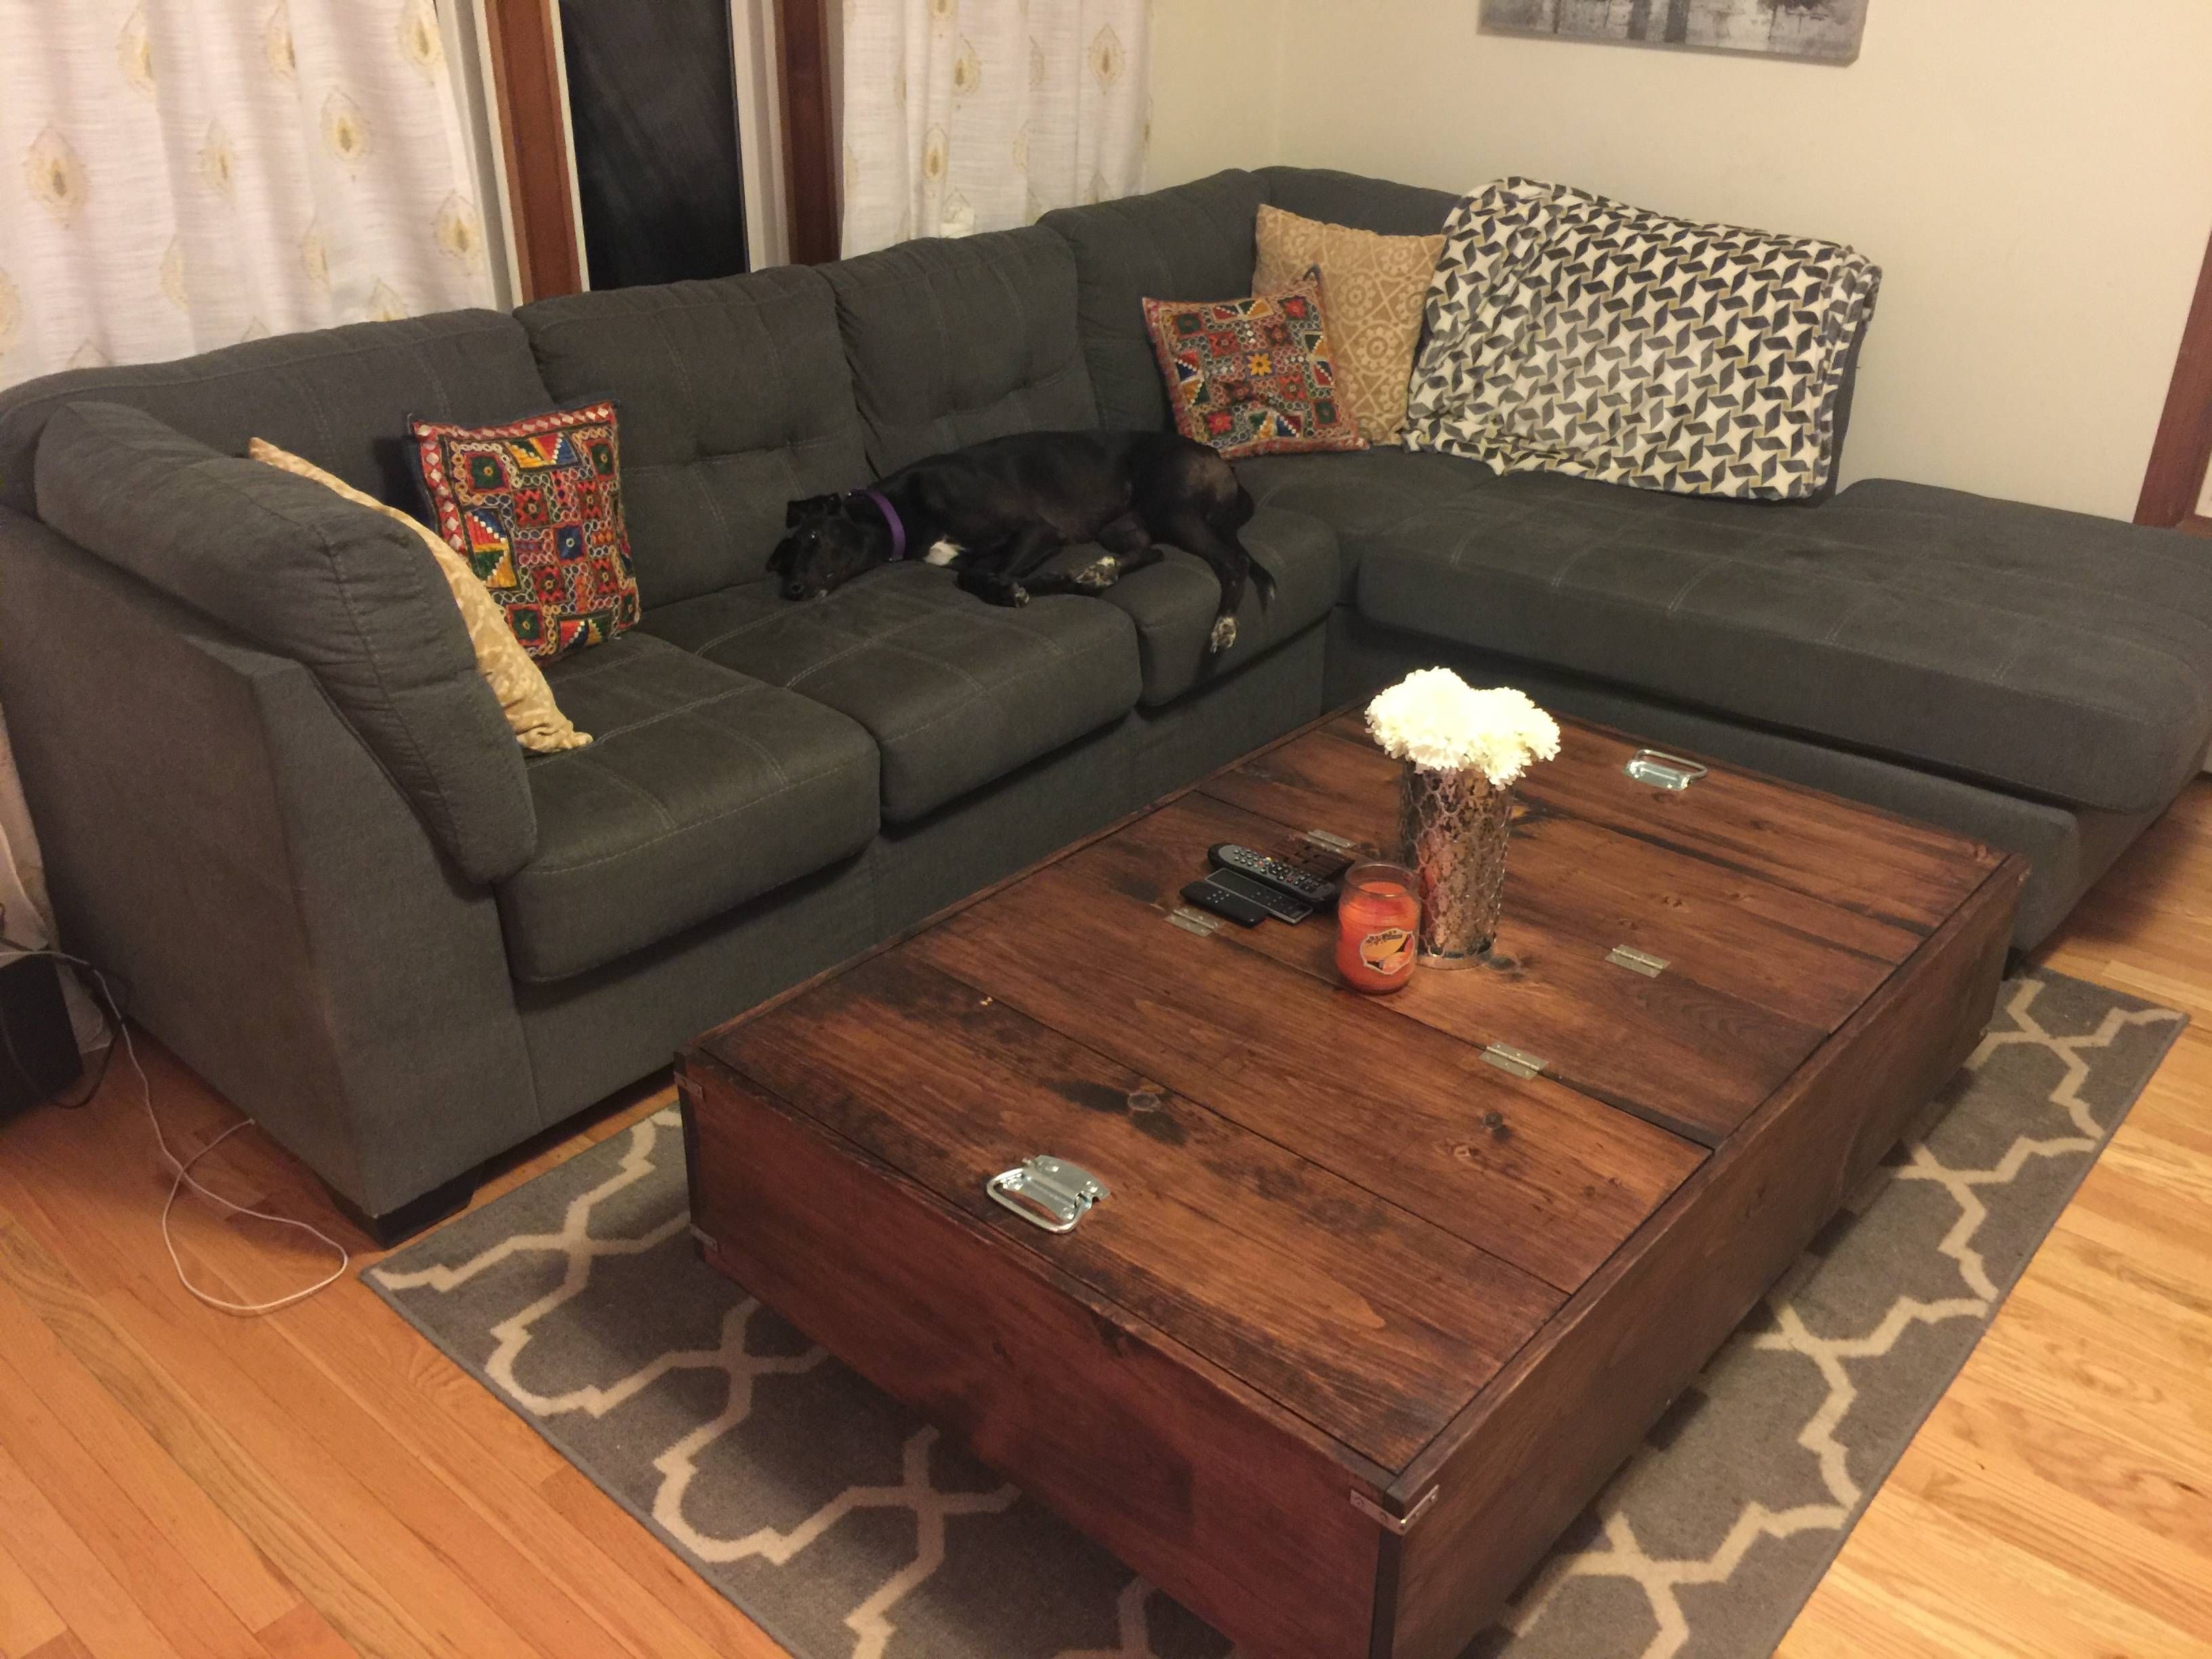 Diy Large Coffee Table With Storage – Album On Imgur In Large Coffee Table With Storage (Photo 5 of 12)